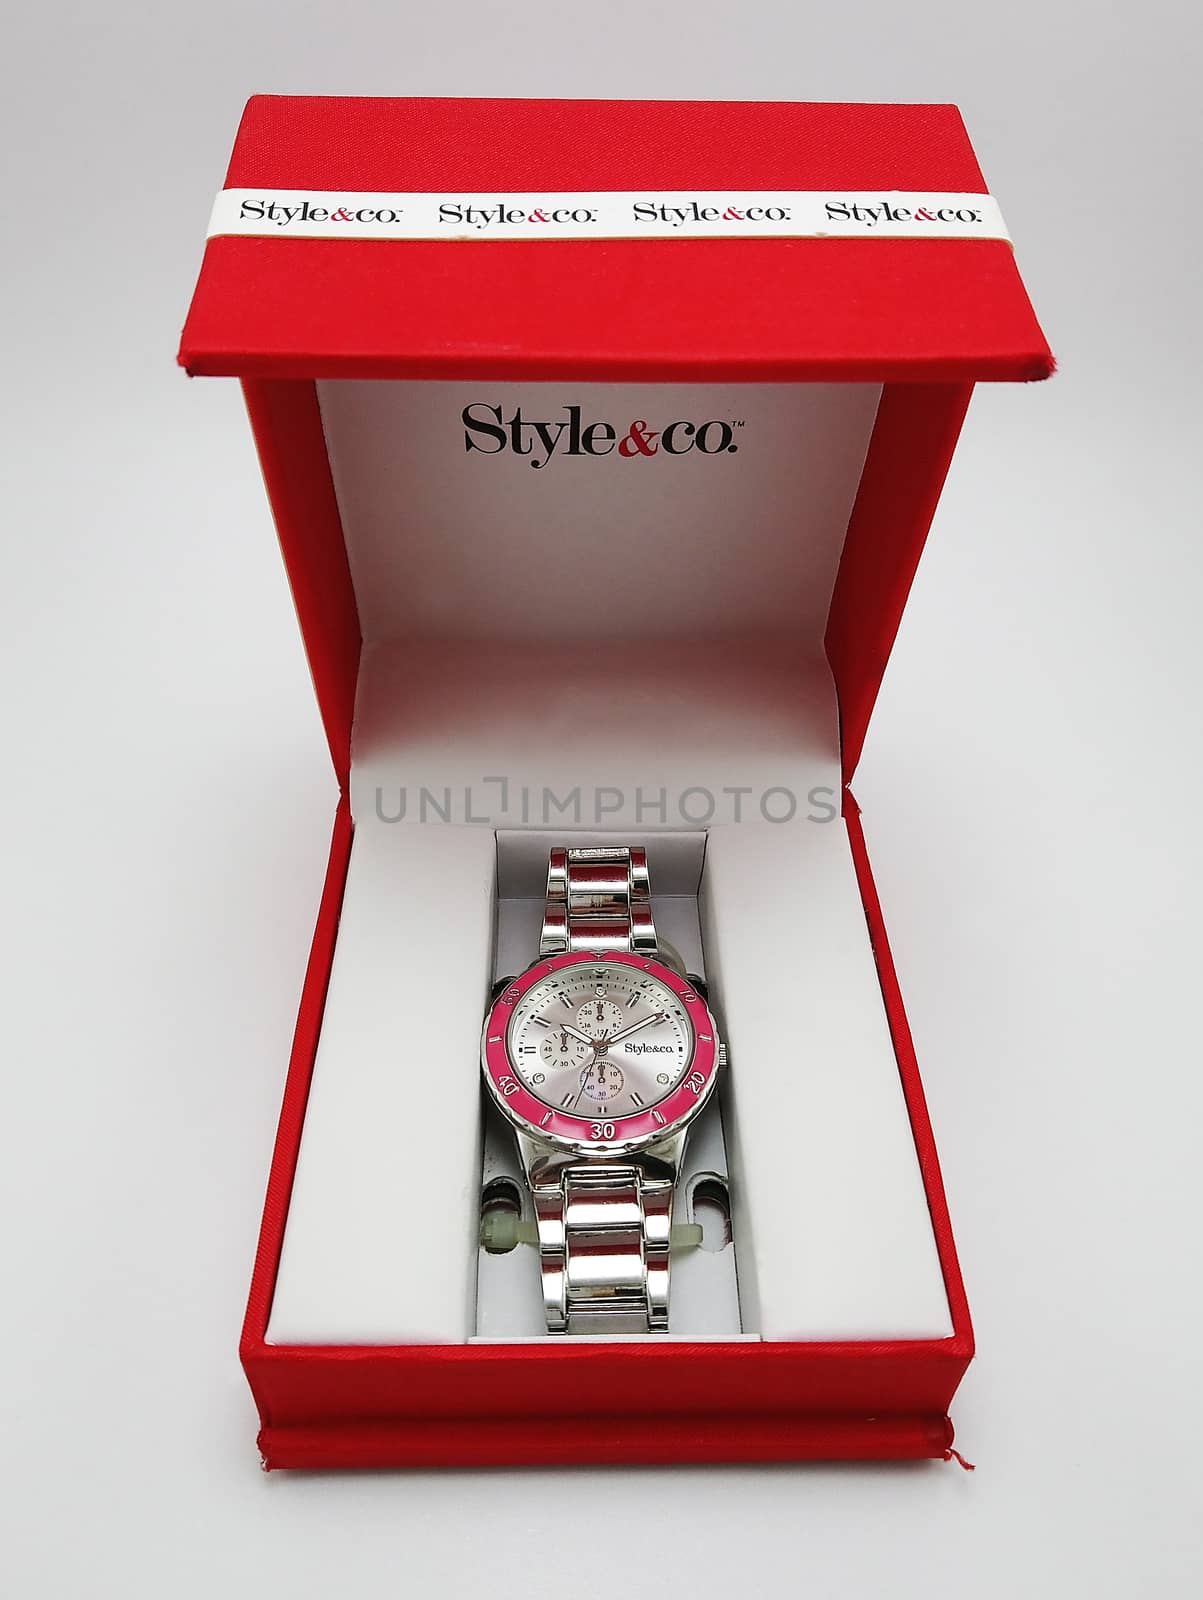 Style and co mens stainless wrist watch at red box in Manila, Ph by imwaltersy